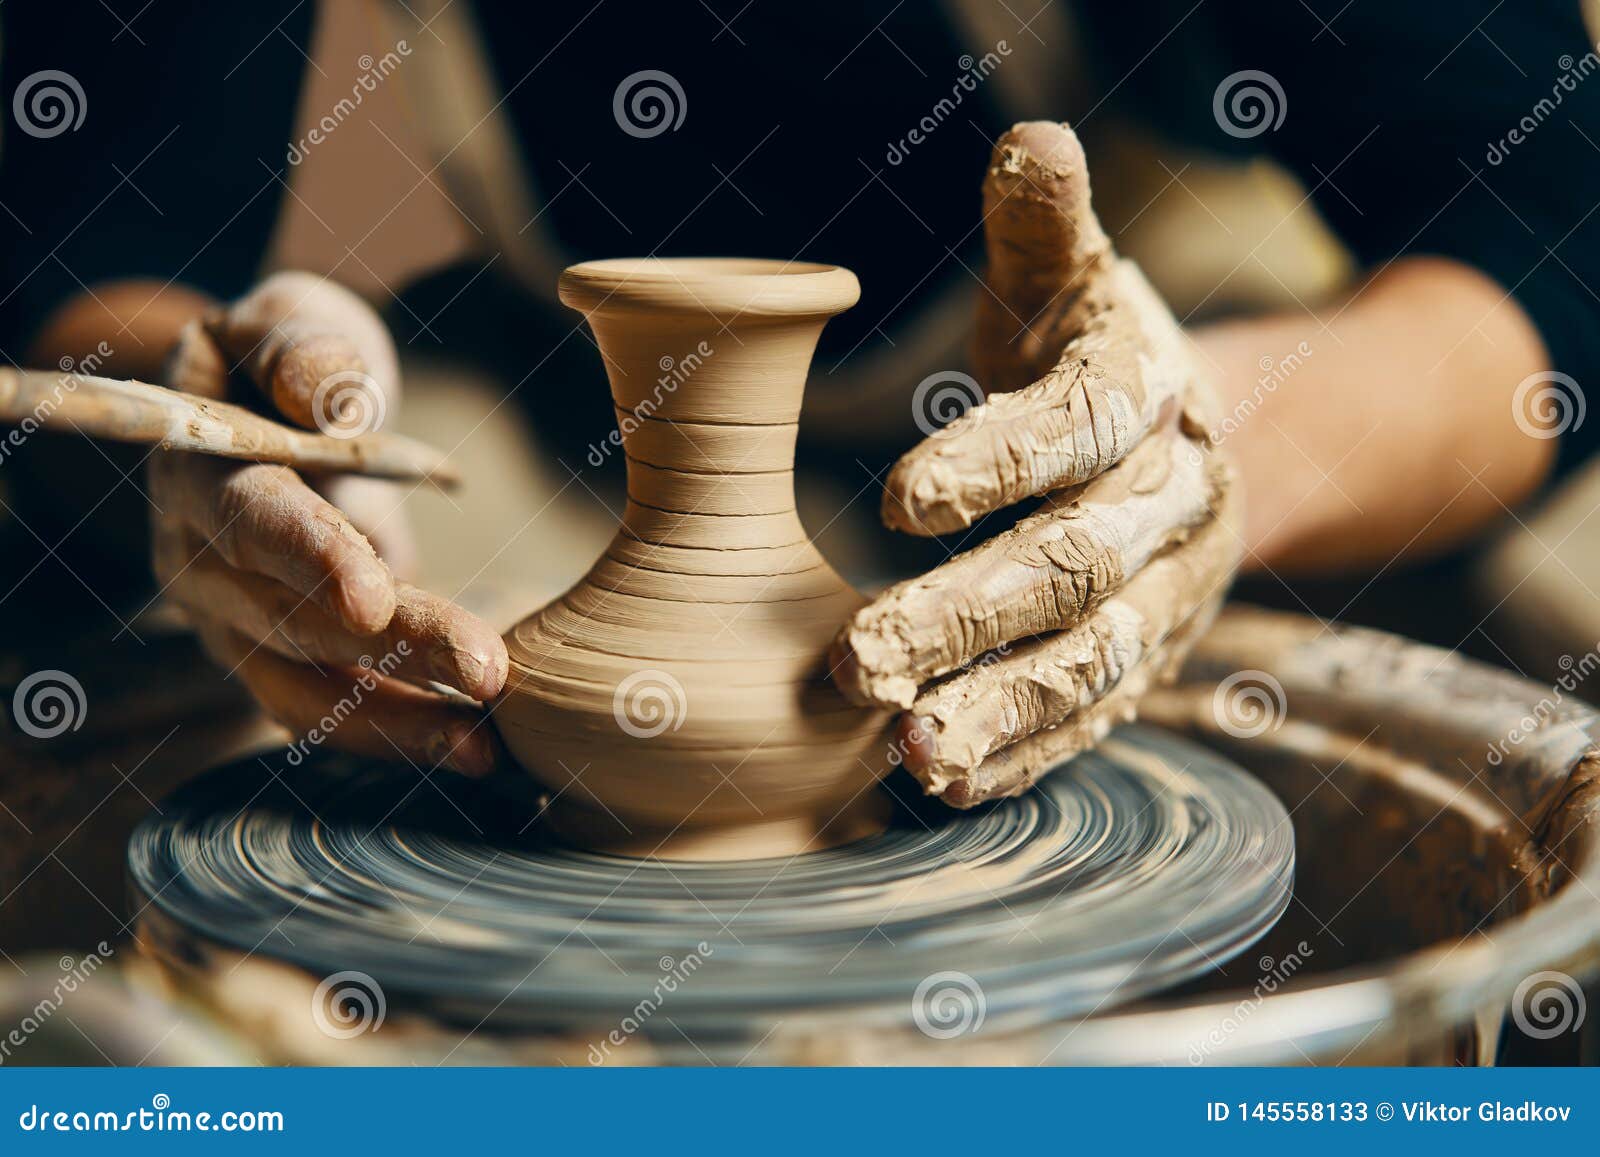 potter modeling ceramic pot from clay on a potter`s wheel